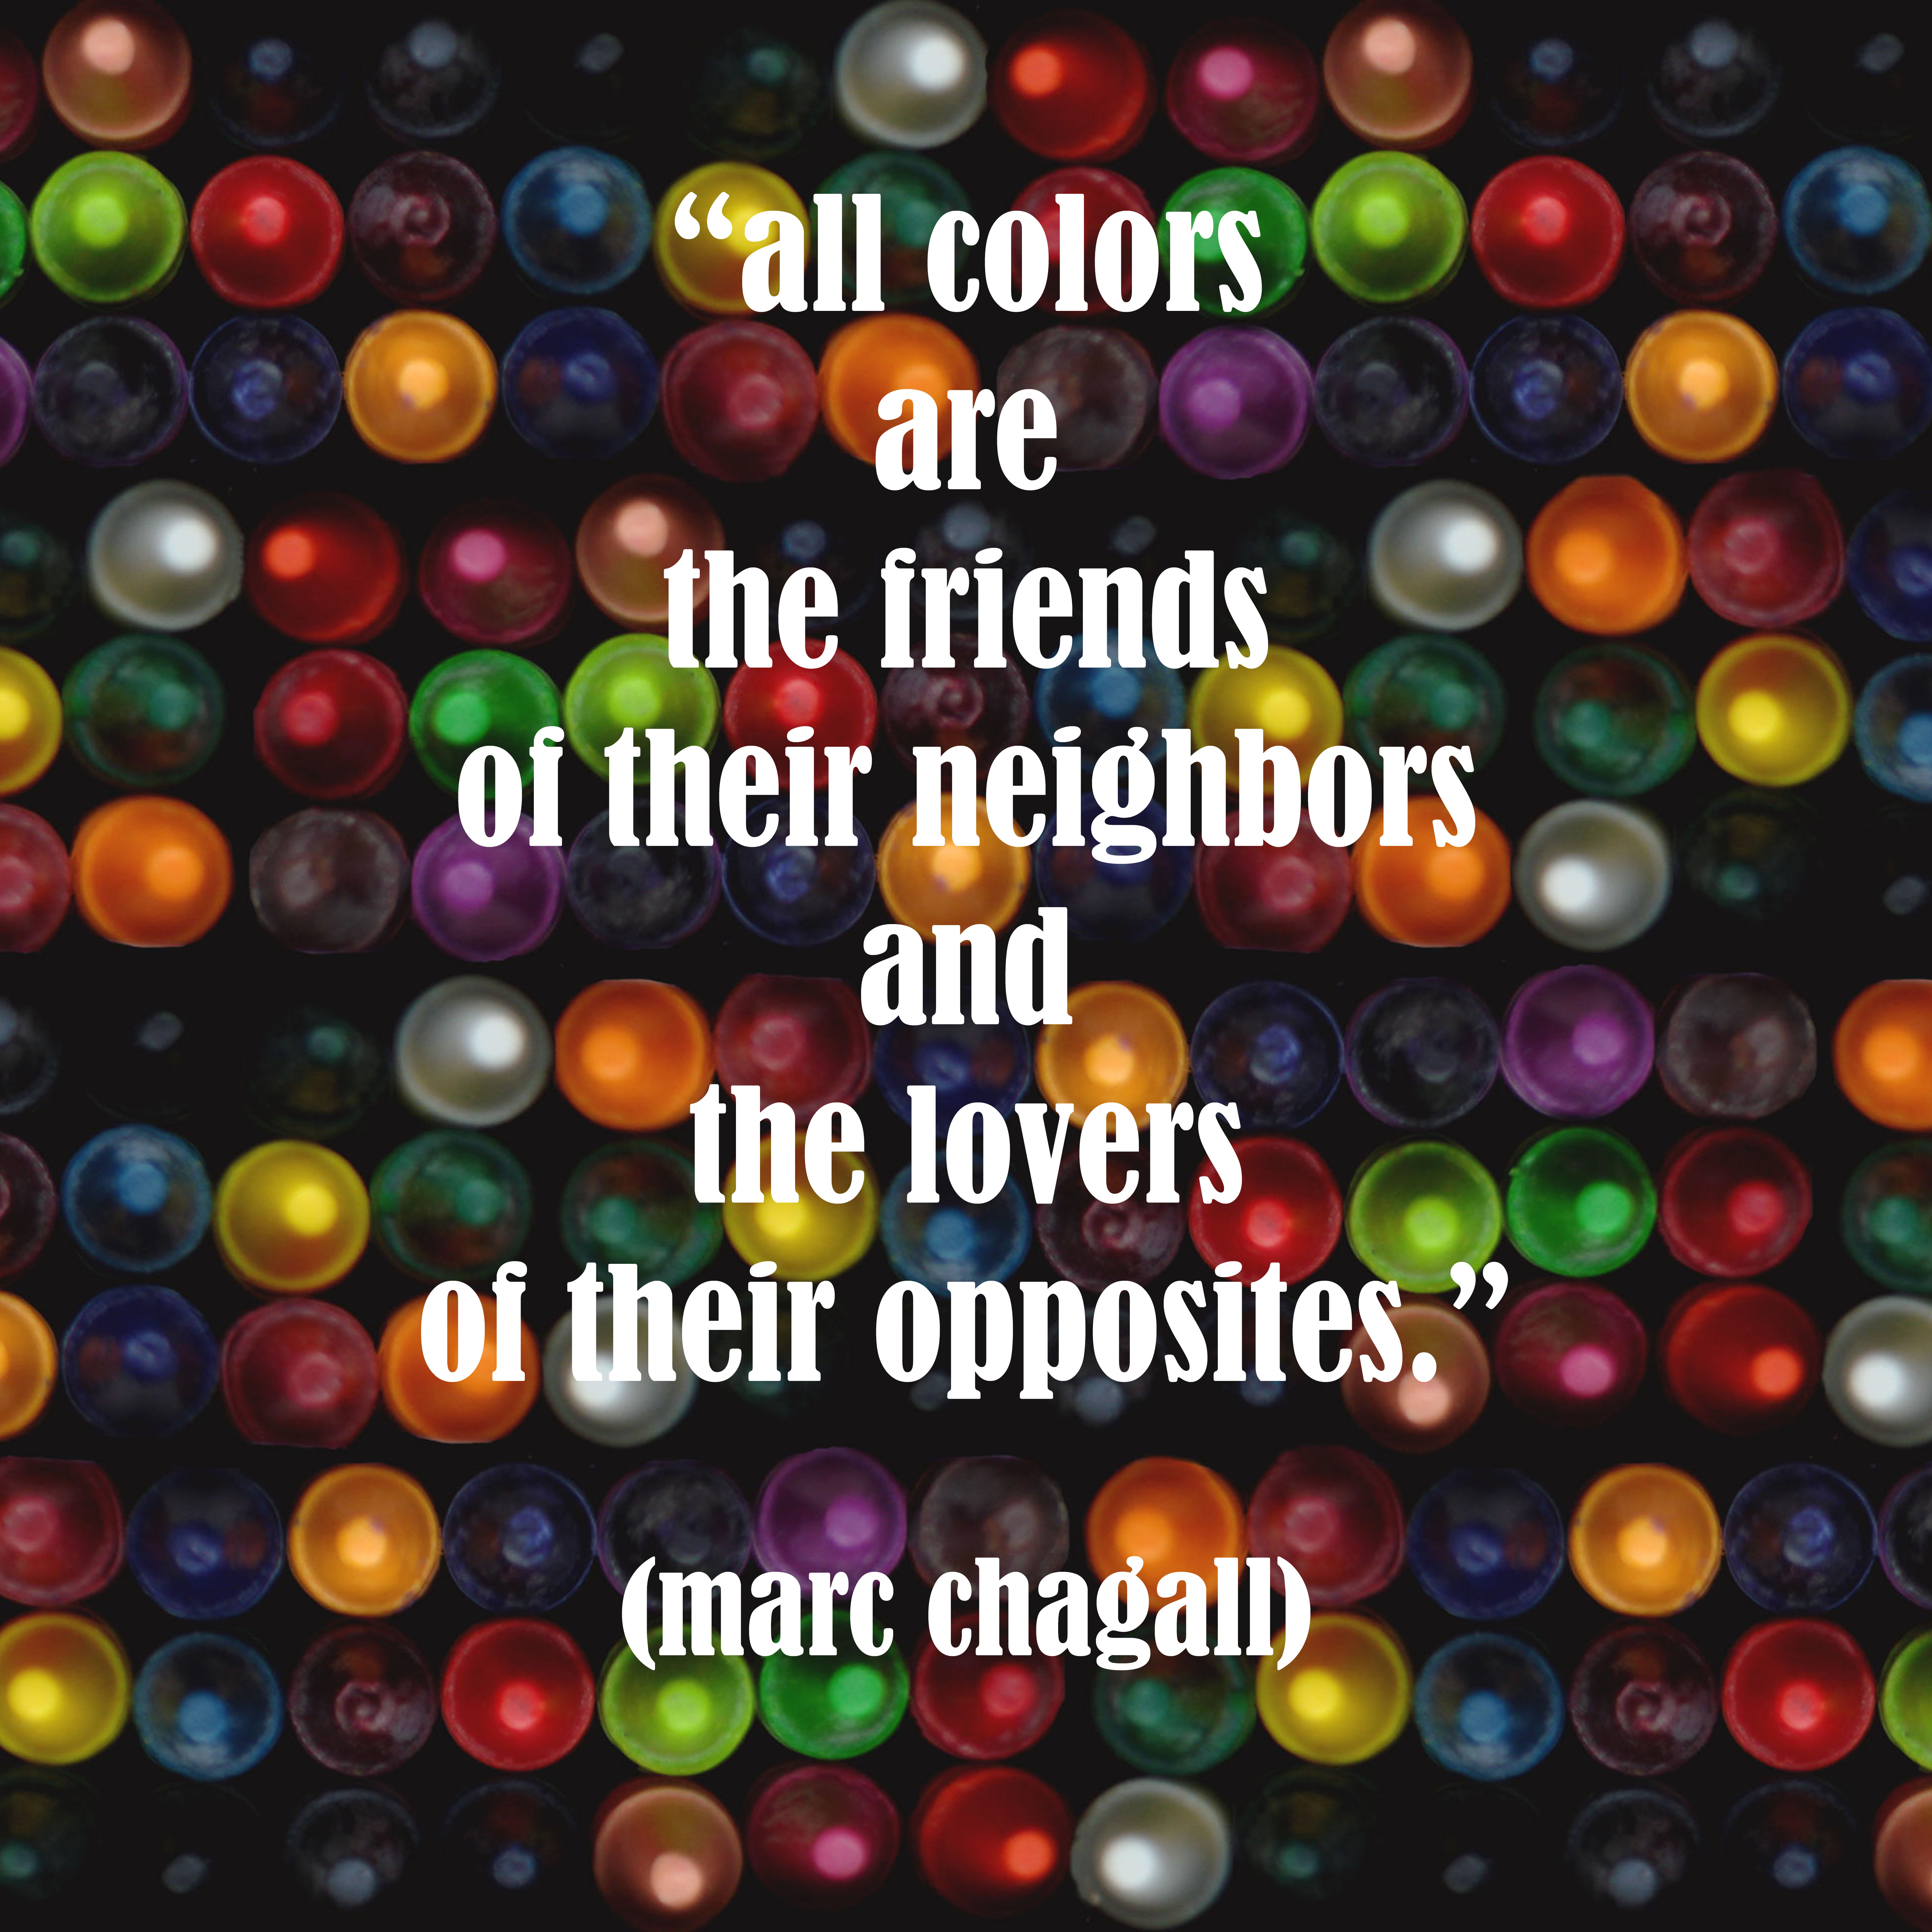 marc chagall quote